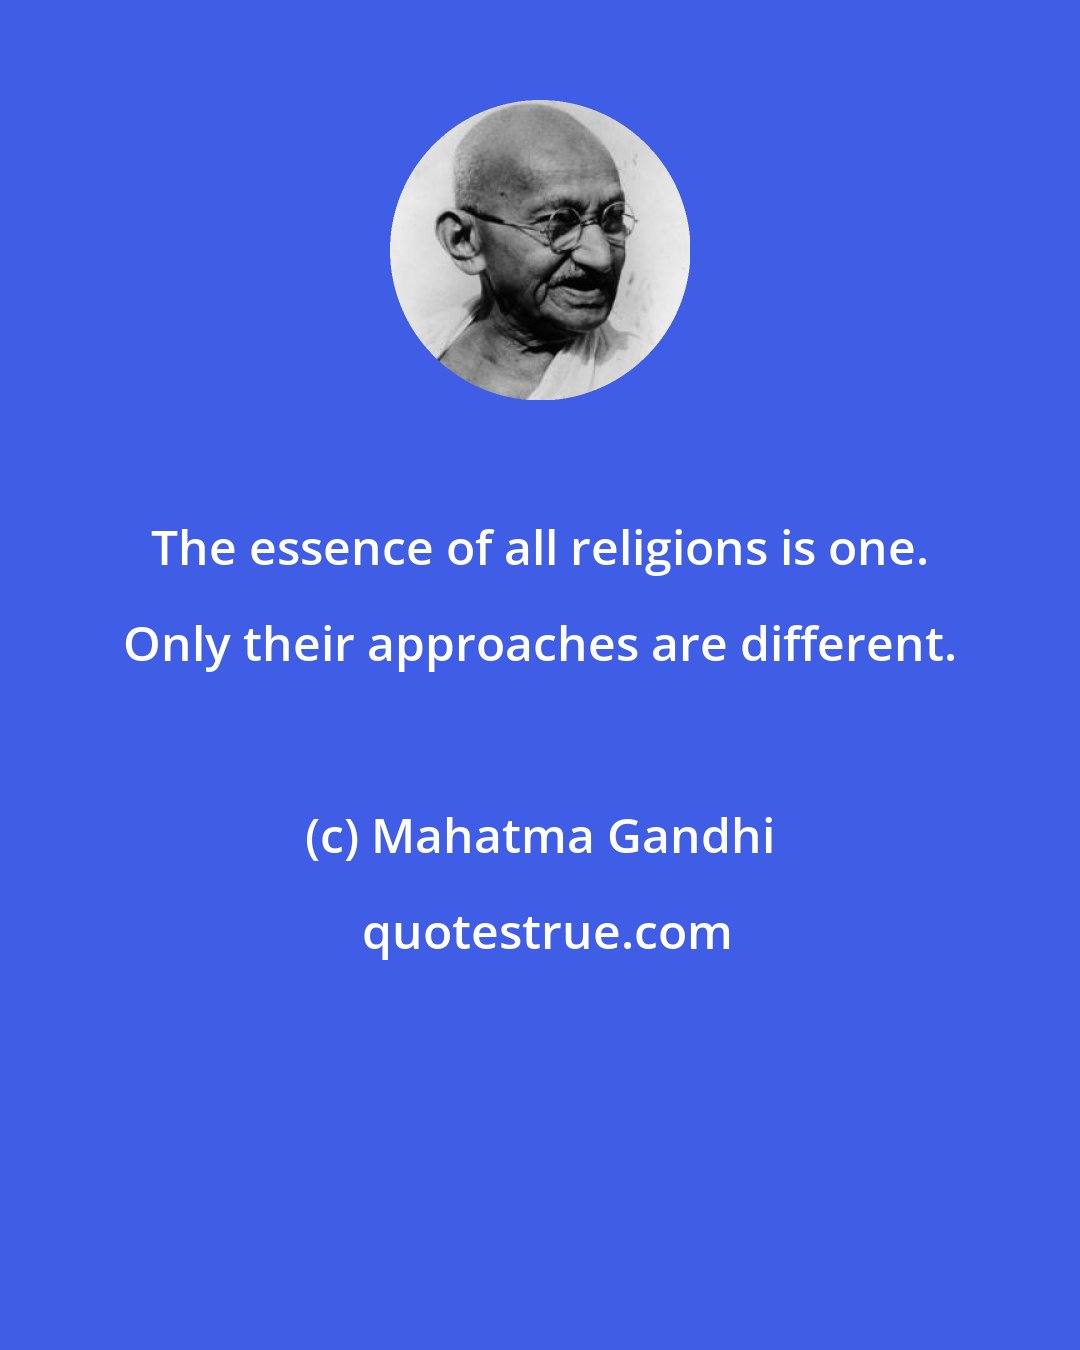 Mahatma Gandhi: The essence of all religions is one. Only their approaches are different.